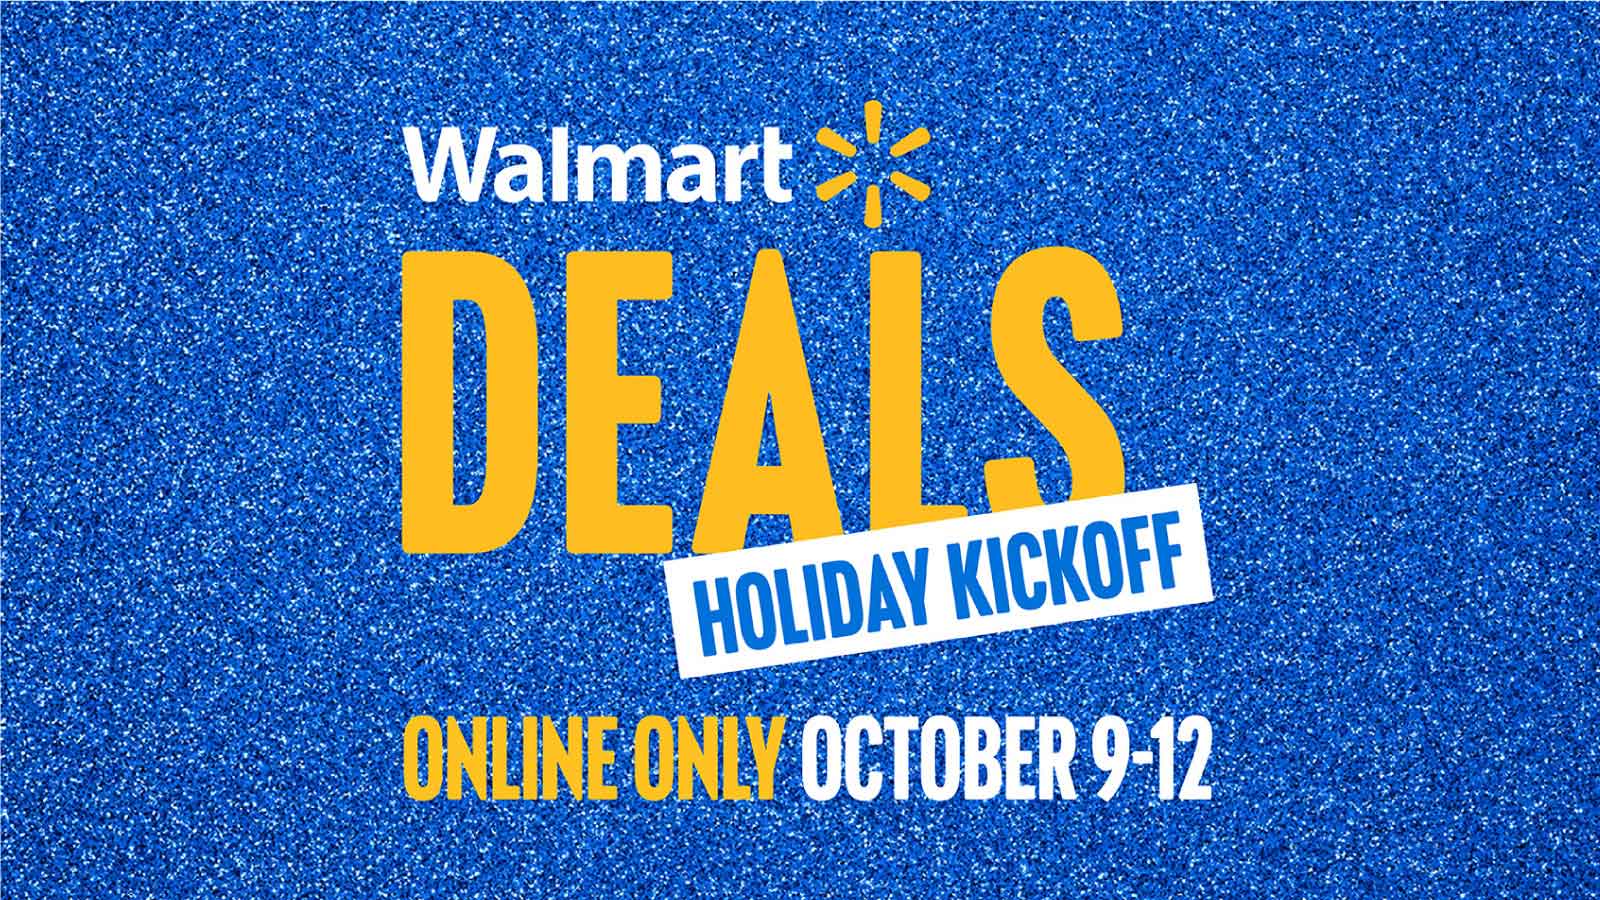 Walmart has deals on the most-wanted gifts